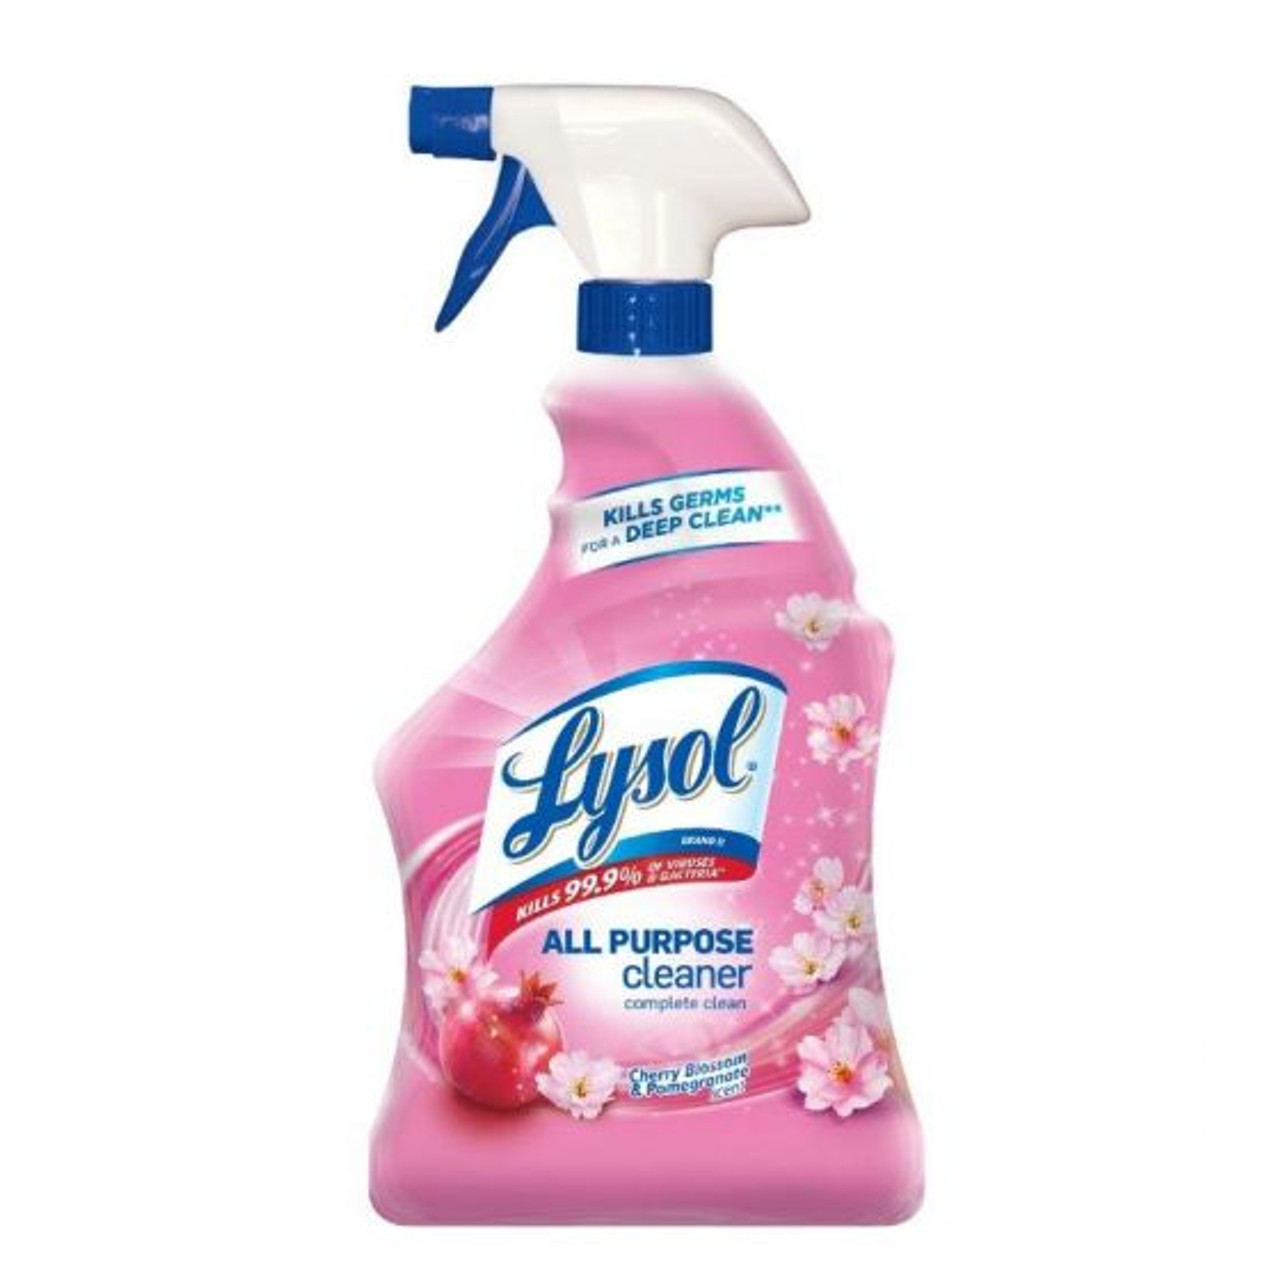 Lysol All purpose cleaner 19 oz spray bottle
Kills 99.9% of all viruses and bacteria